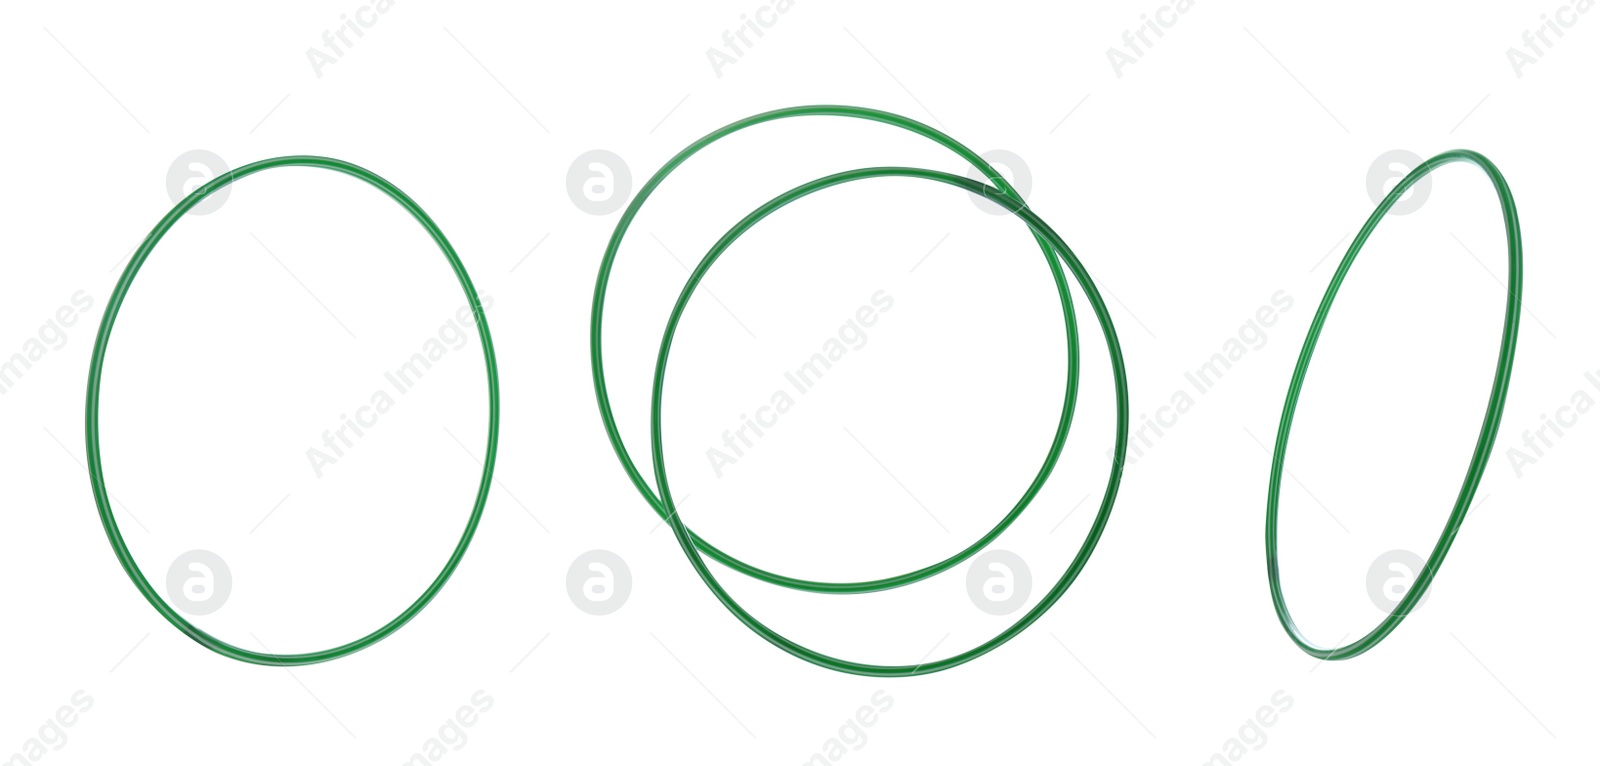 Image of Set of hula hoops isolated on white. Banner design